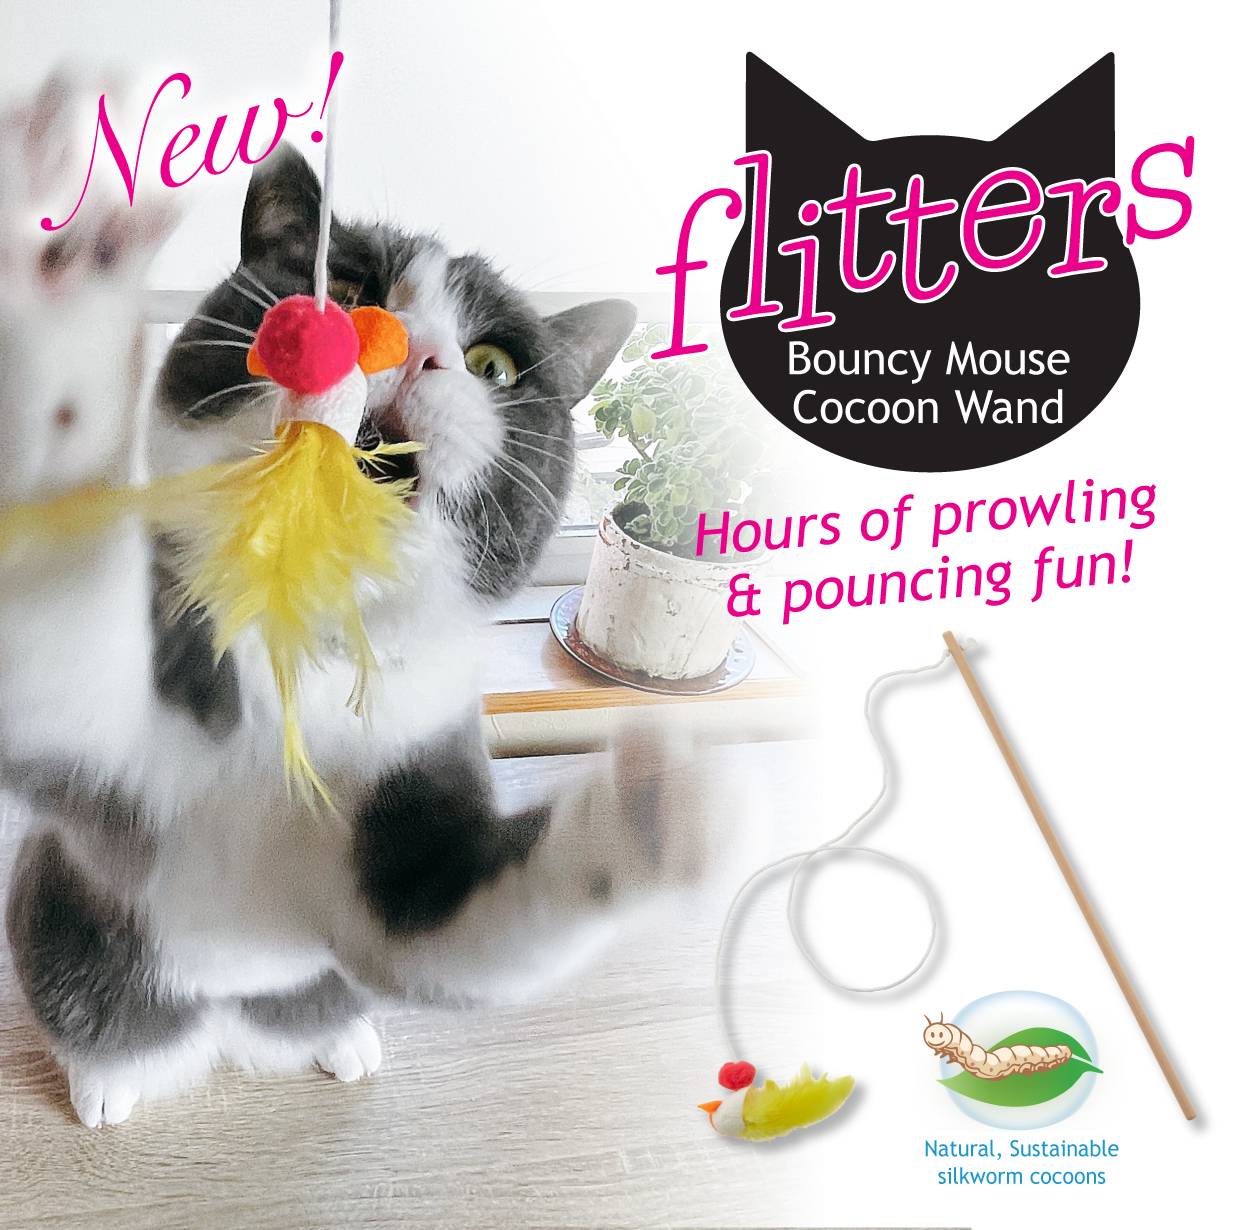 Flitters Bouncy Mouse Cocoon Wand (Feather)